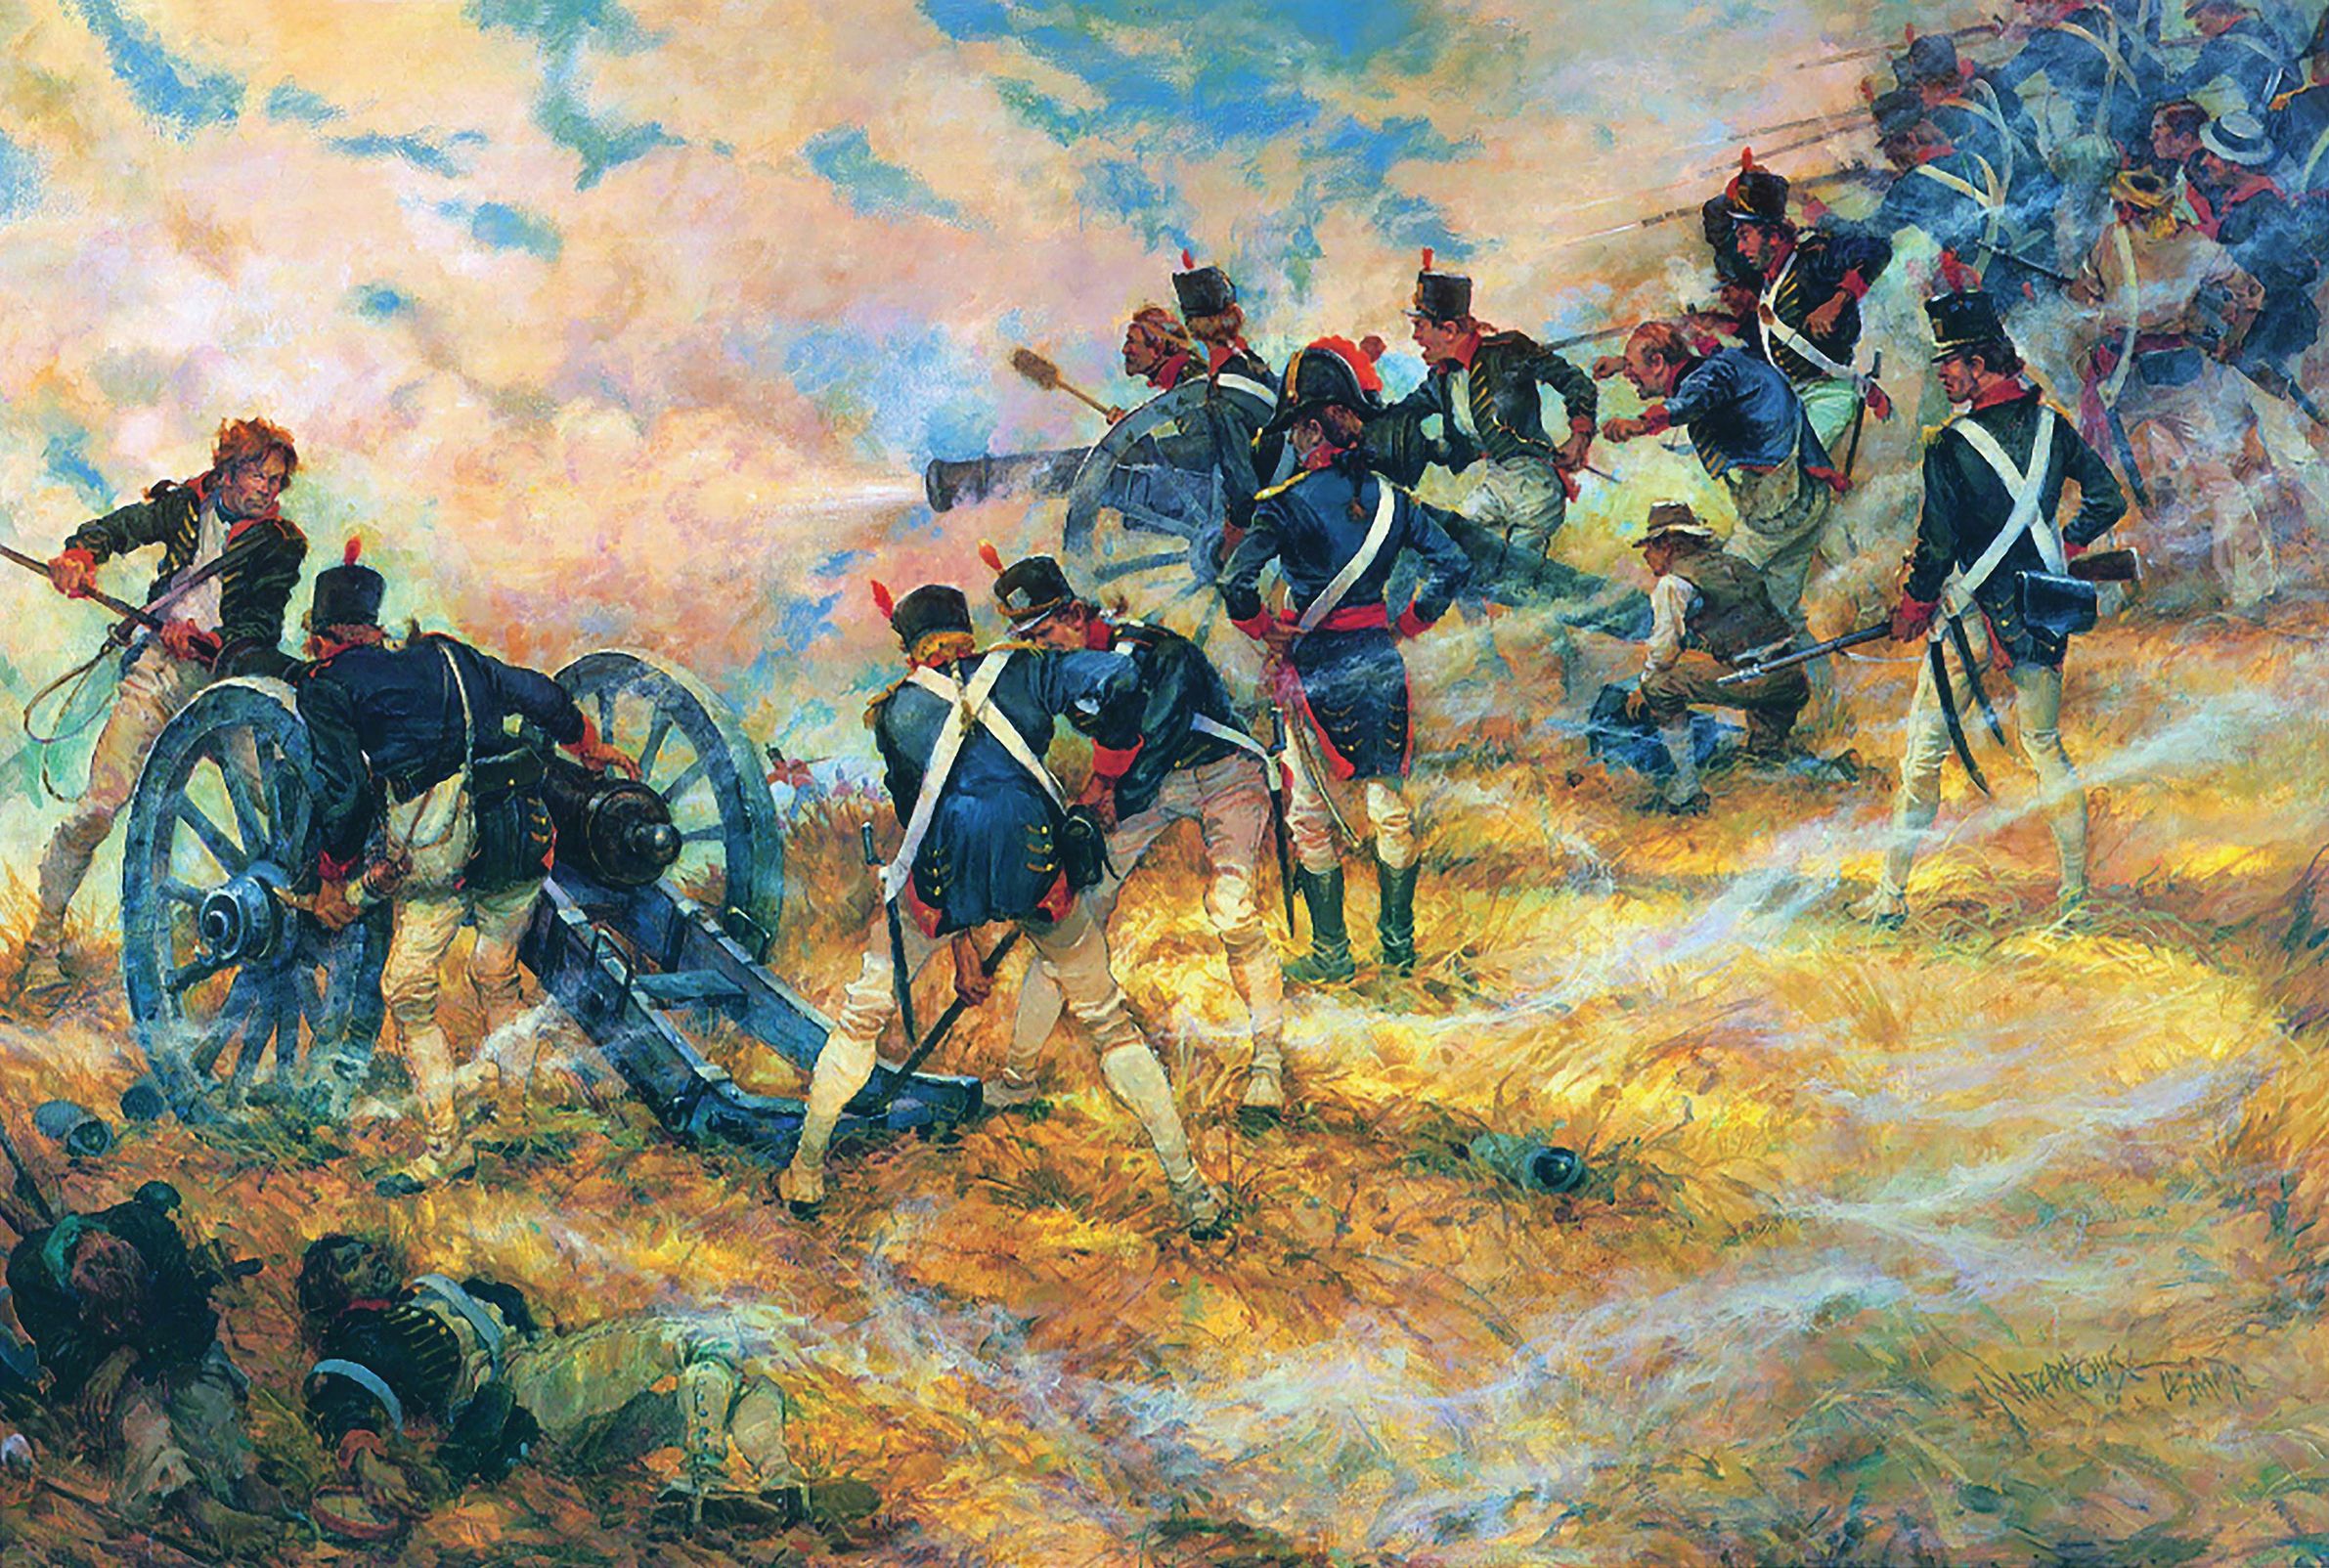 At the battle of Bladensburg, Maryland, U.S. Marines helped stop the British attack as American militia fled the field. The “greatest disgrace ever dealt to American arms” allowed British forces to capture and burn Washington, D.C.